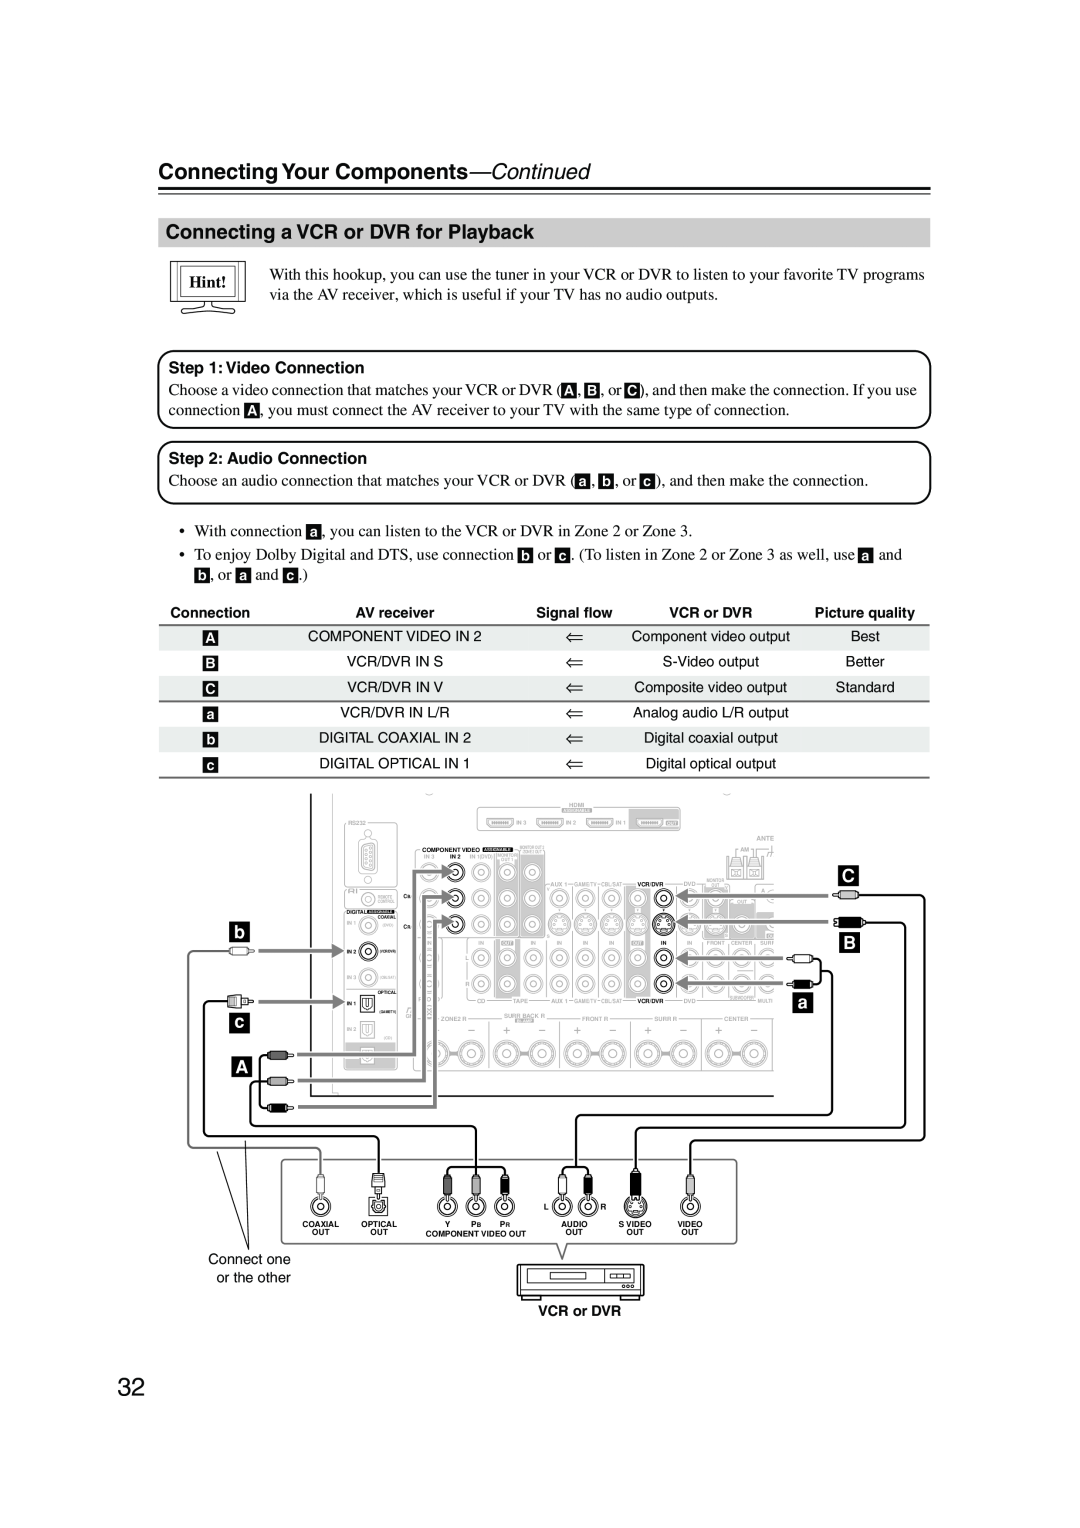 Integra DTR-7.8 instruction manual Connecting a VCR or DVR for Playback, Connecting Your Components—Continued, b c A, Hint 